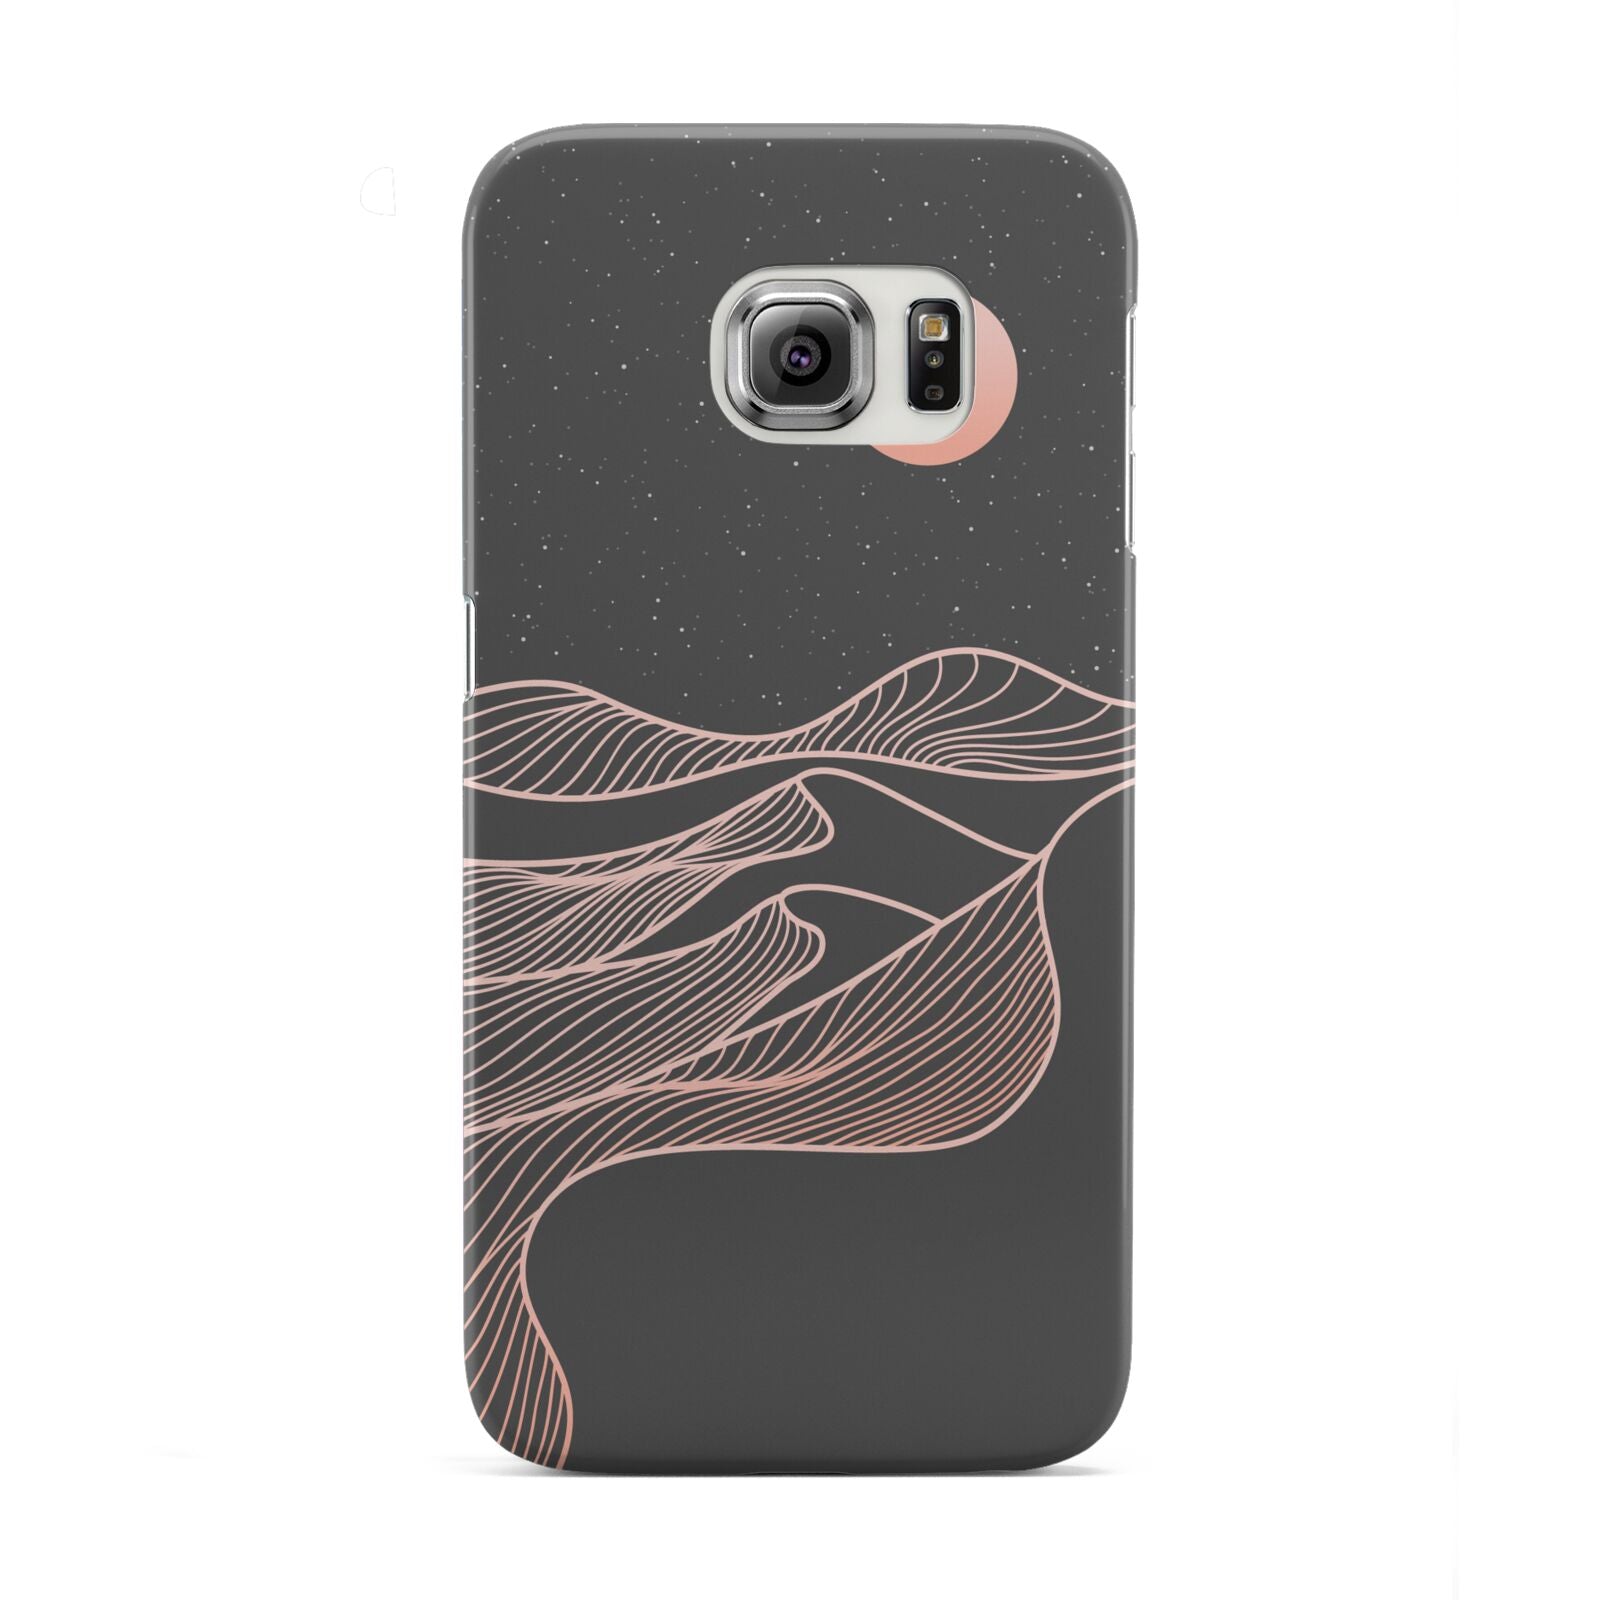 Abstract Sunset Samsung Galaxy S6 Edge Case